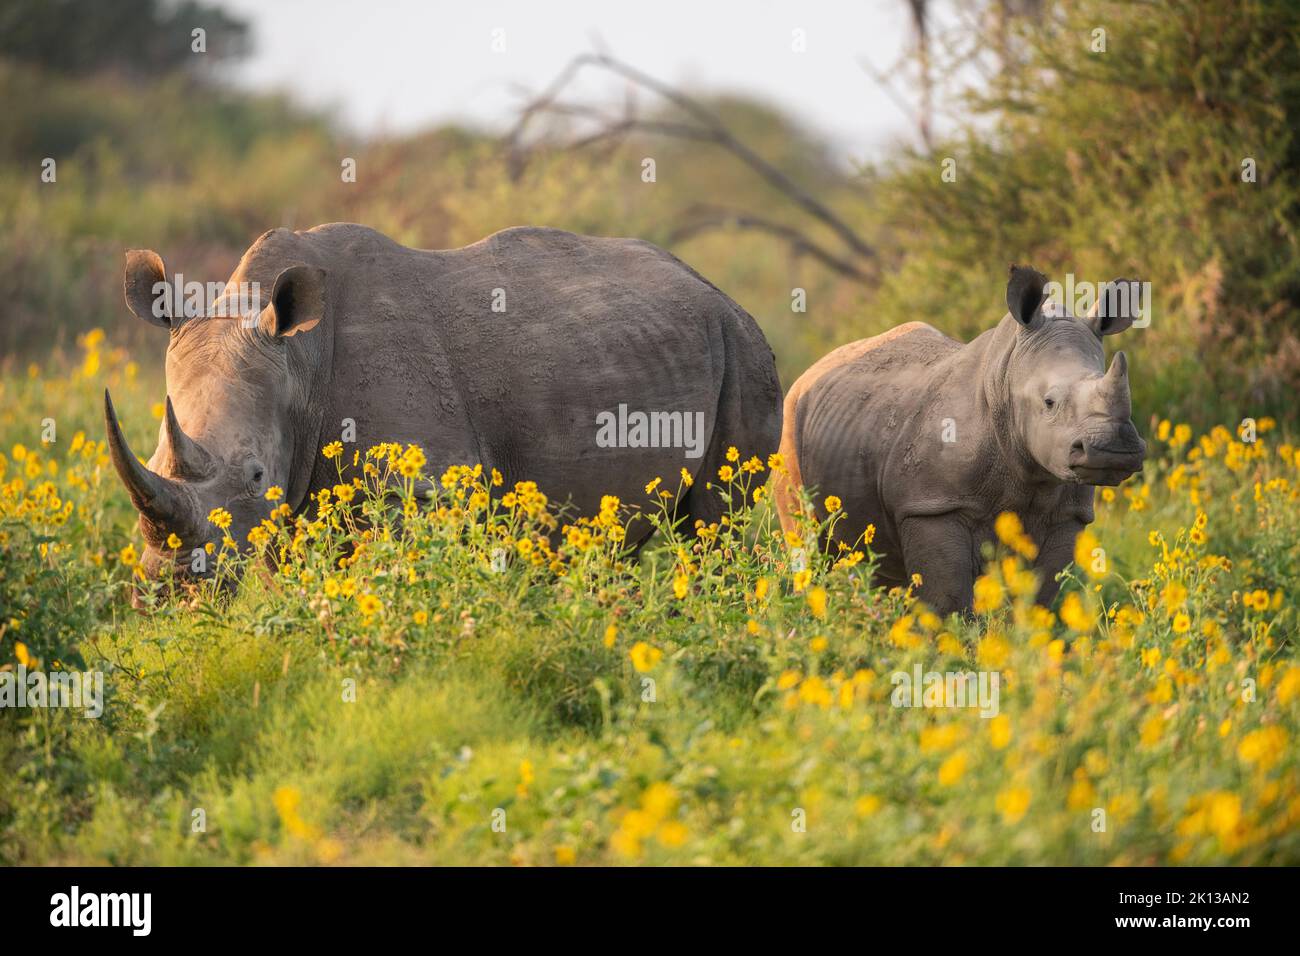 Young White Rhino with mother, Marataba, Marakele National Park, South Africa, Africa Stock Photo